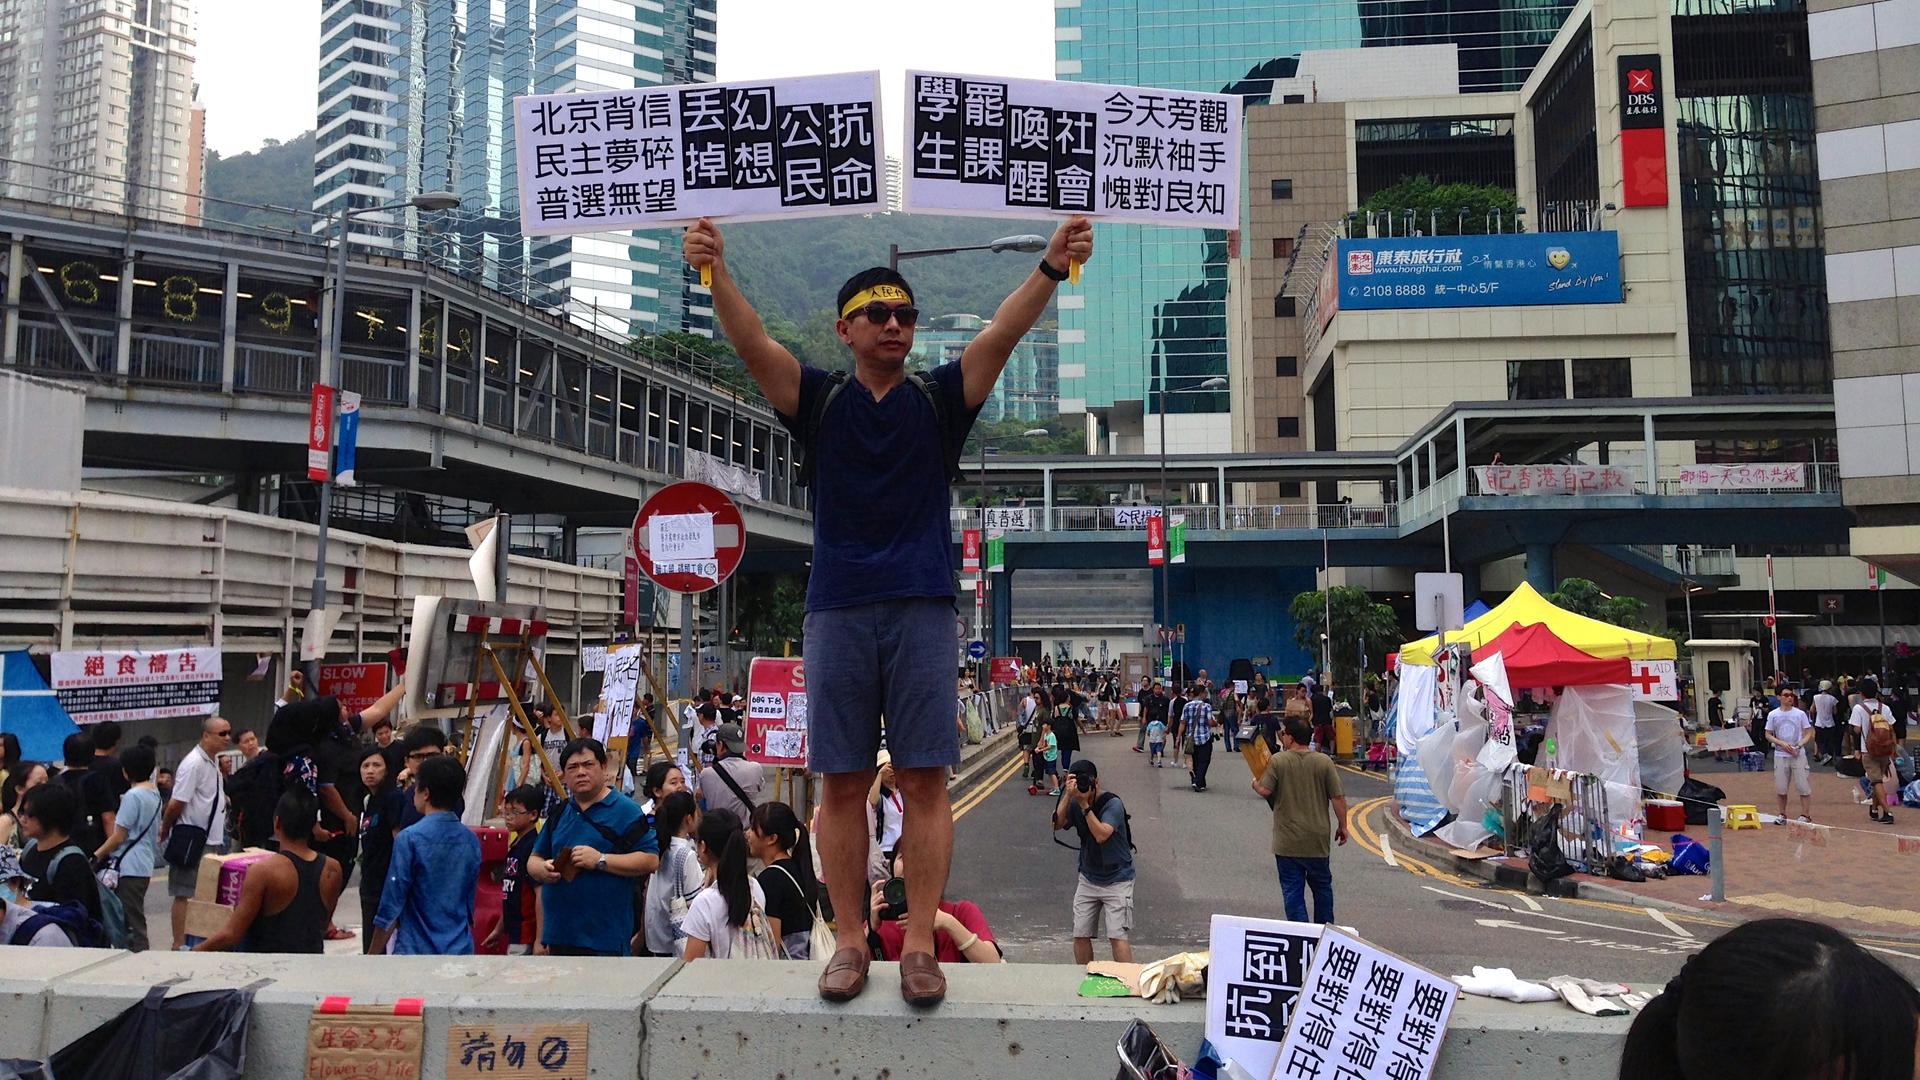 A protester's signs urged Hong Kong citizens to "wake up" and join demonstrations, because "Beijing is not trustworthy, and democracy is a broken dream".